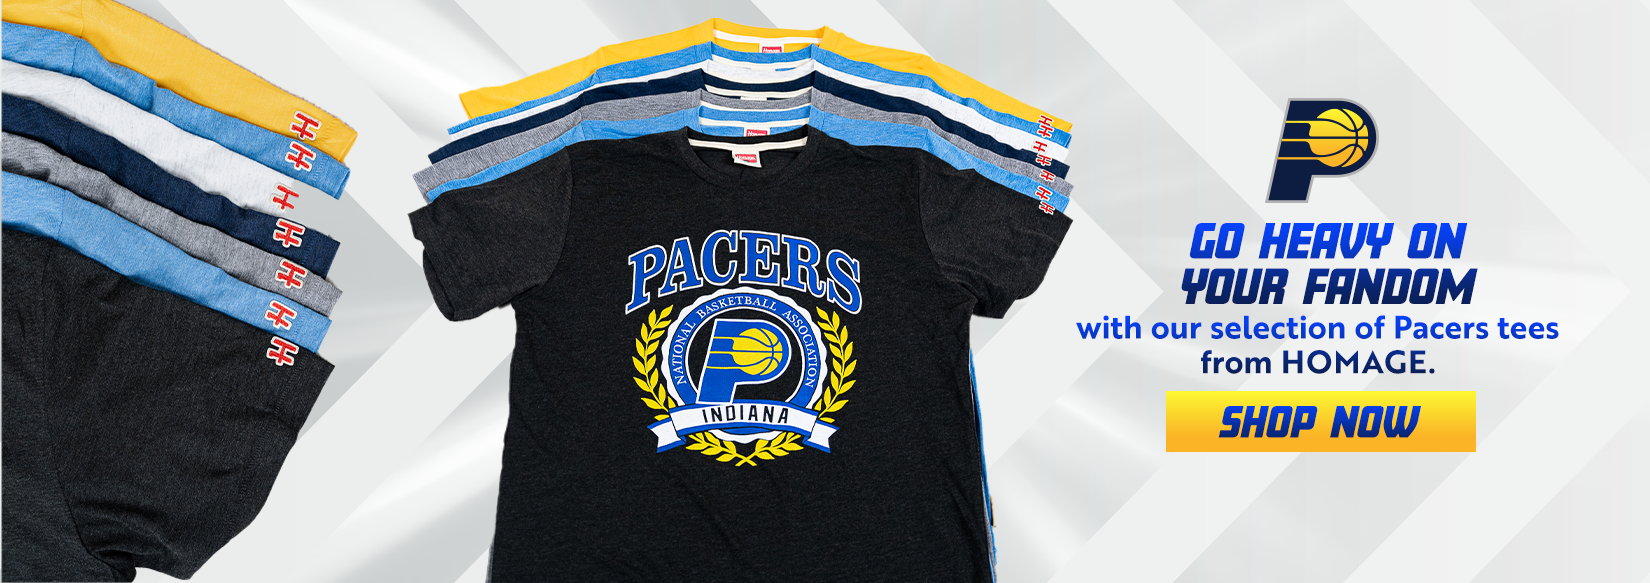 Go Heavy On Your Fandom with our selection of Pacers tees from HOMAGE SHOP NOW